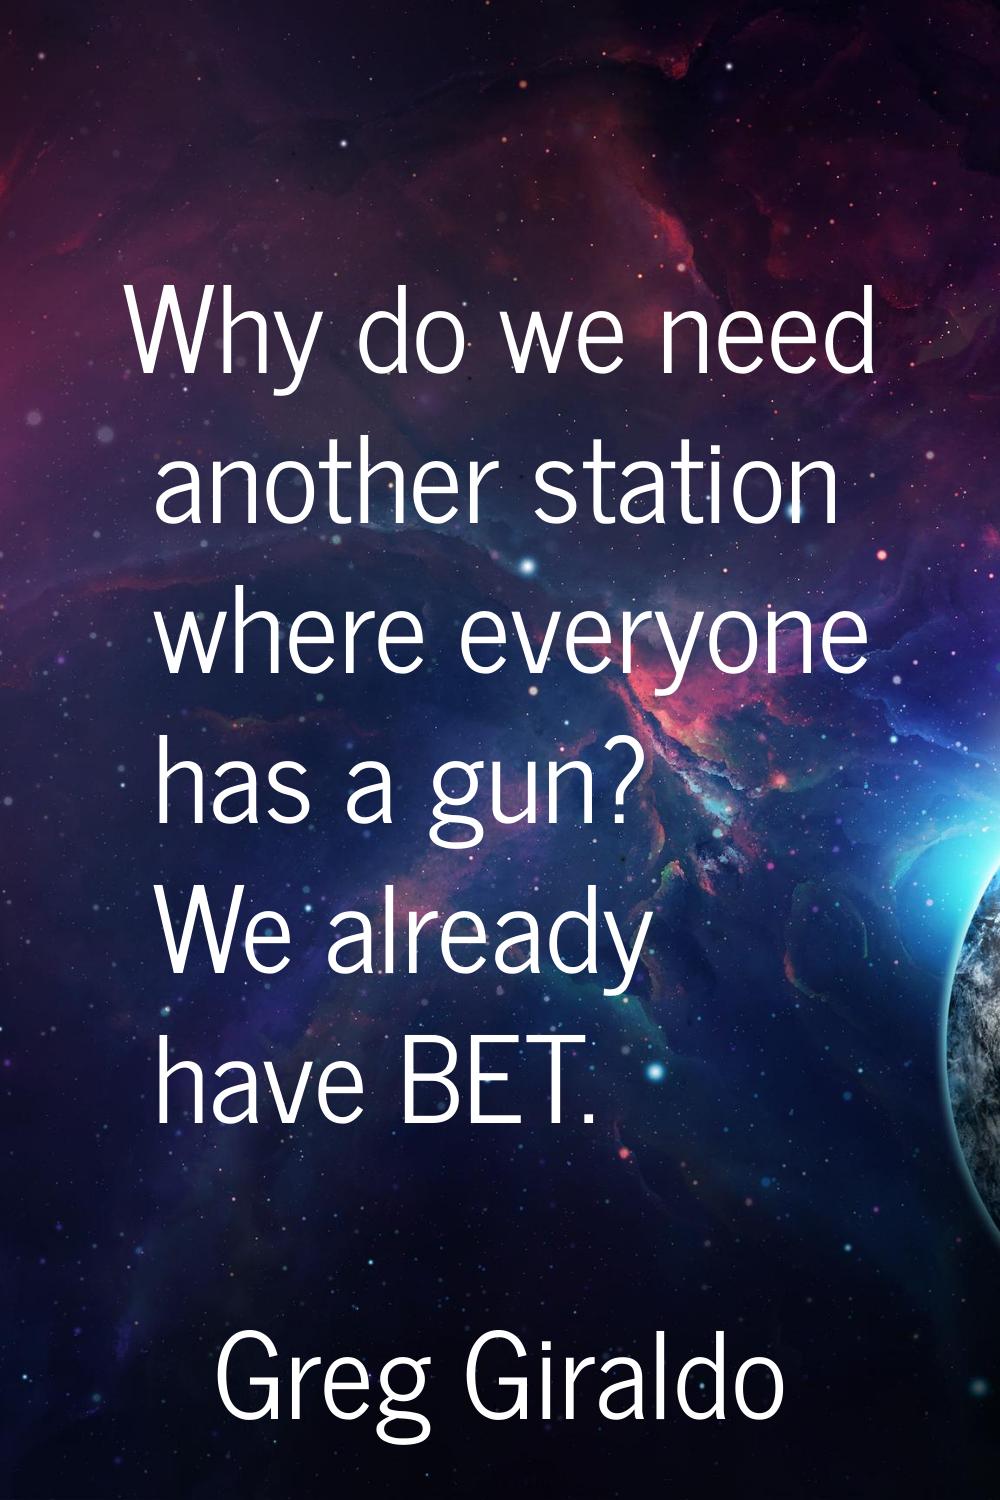 Why do we need another station where everyone has a gun? We already have BET.